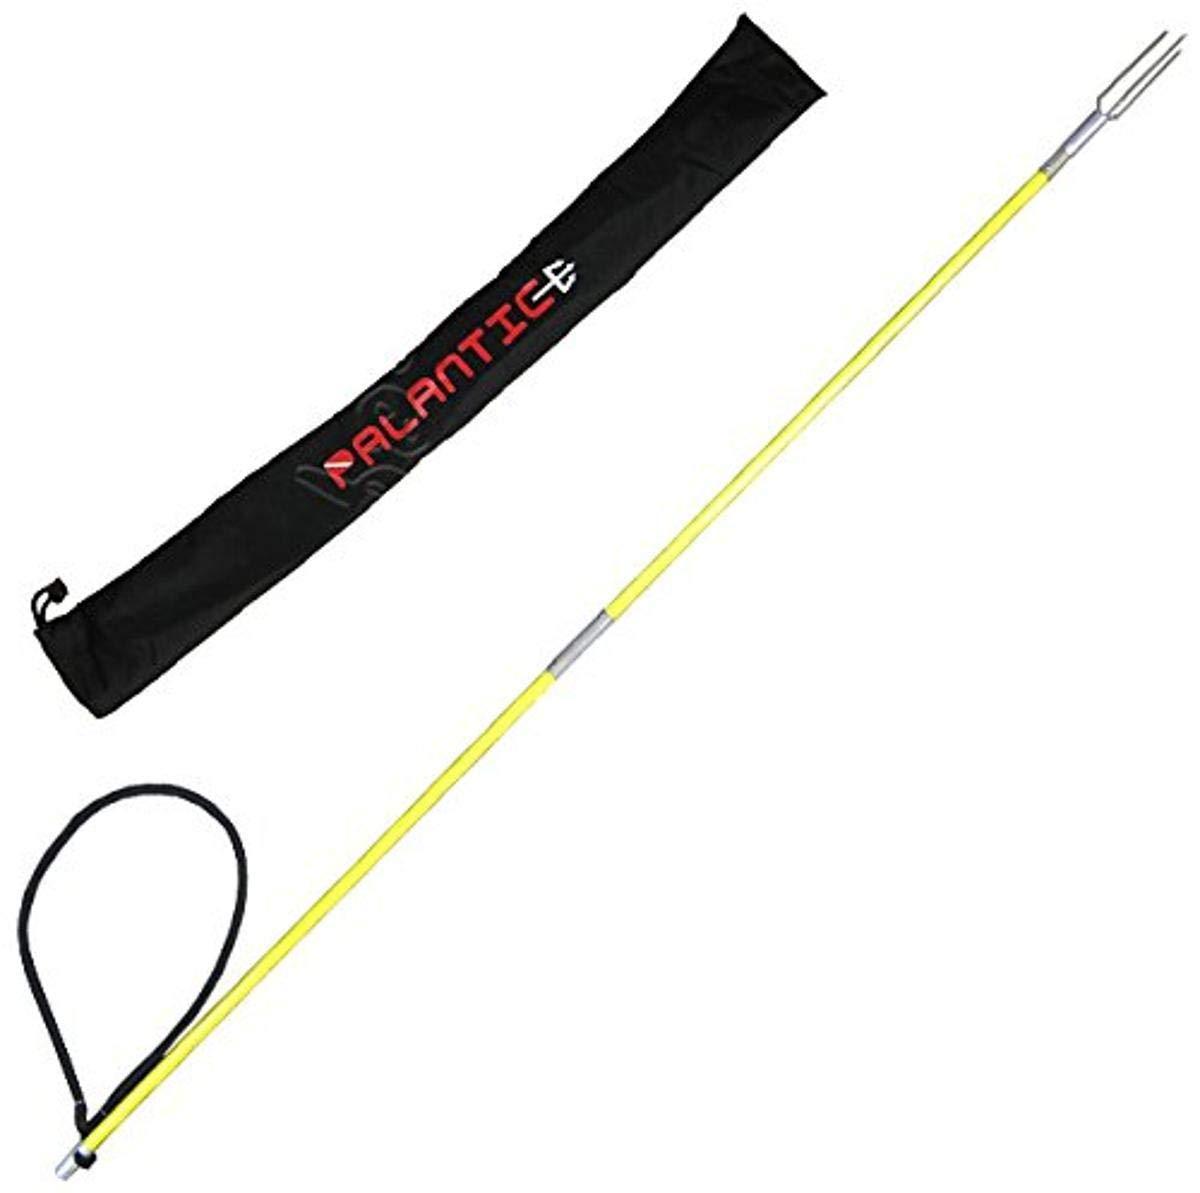 Scuba Choice Fiber Glass 4.5' Travel Two Piece Spearfishing Pole Spear with  Lionfish Barb Tip and Bag